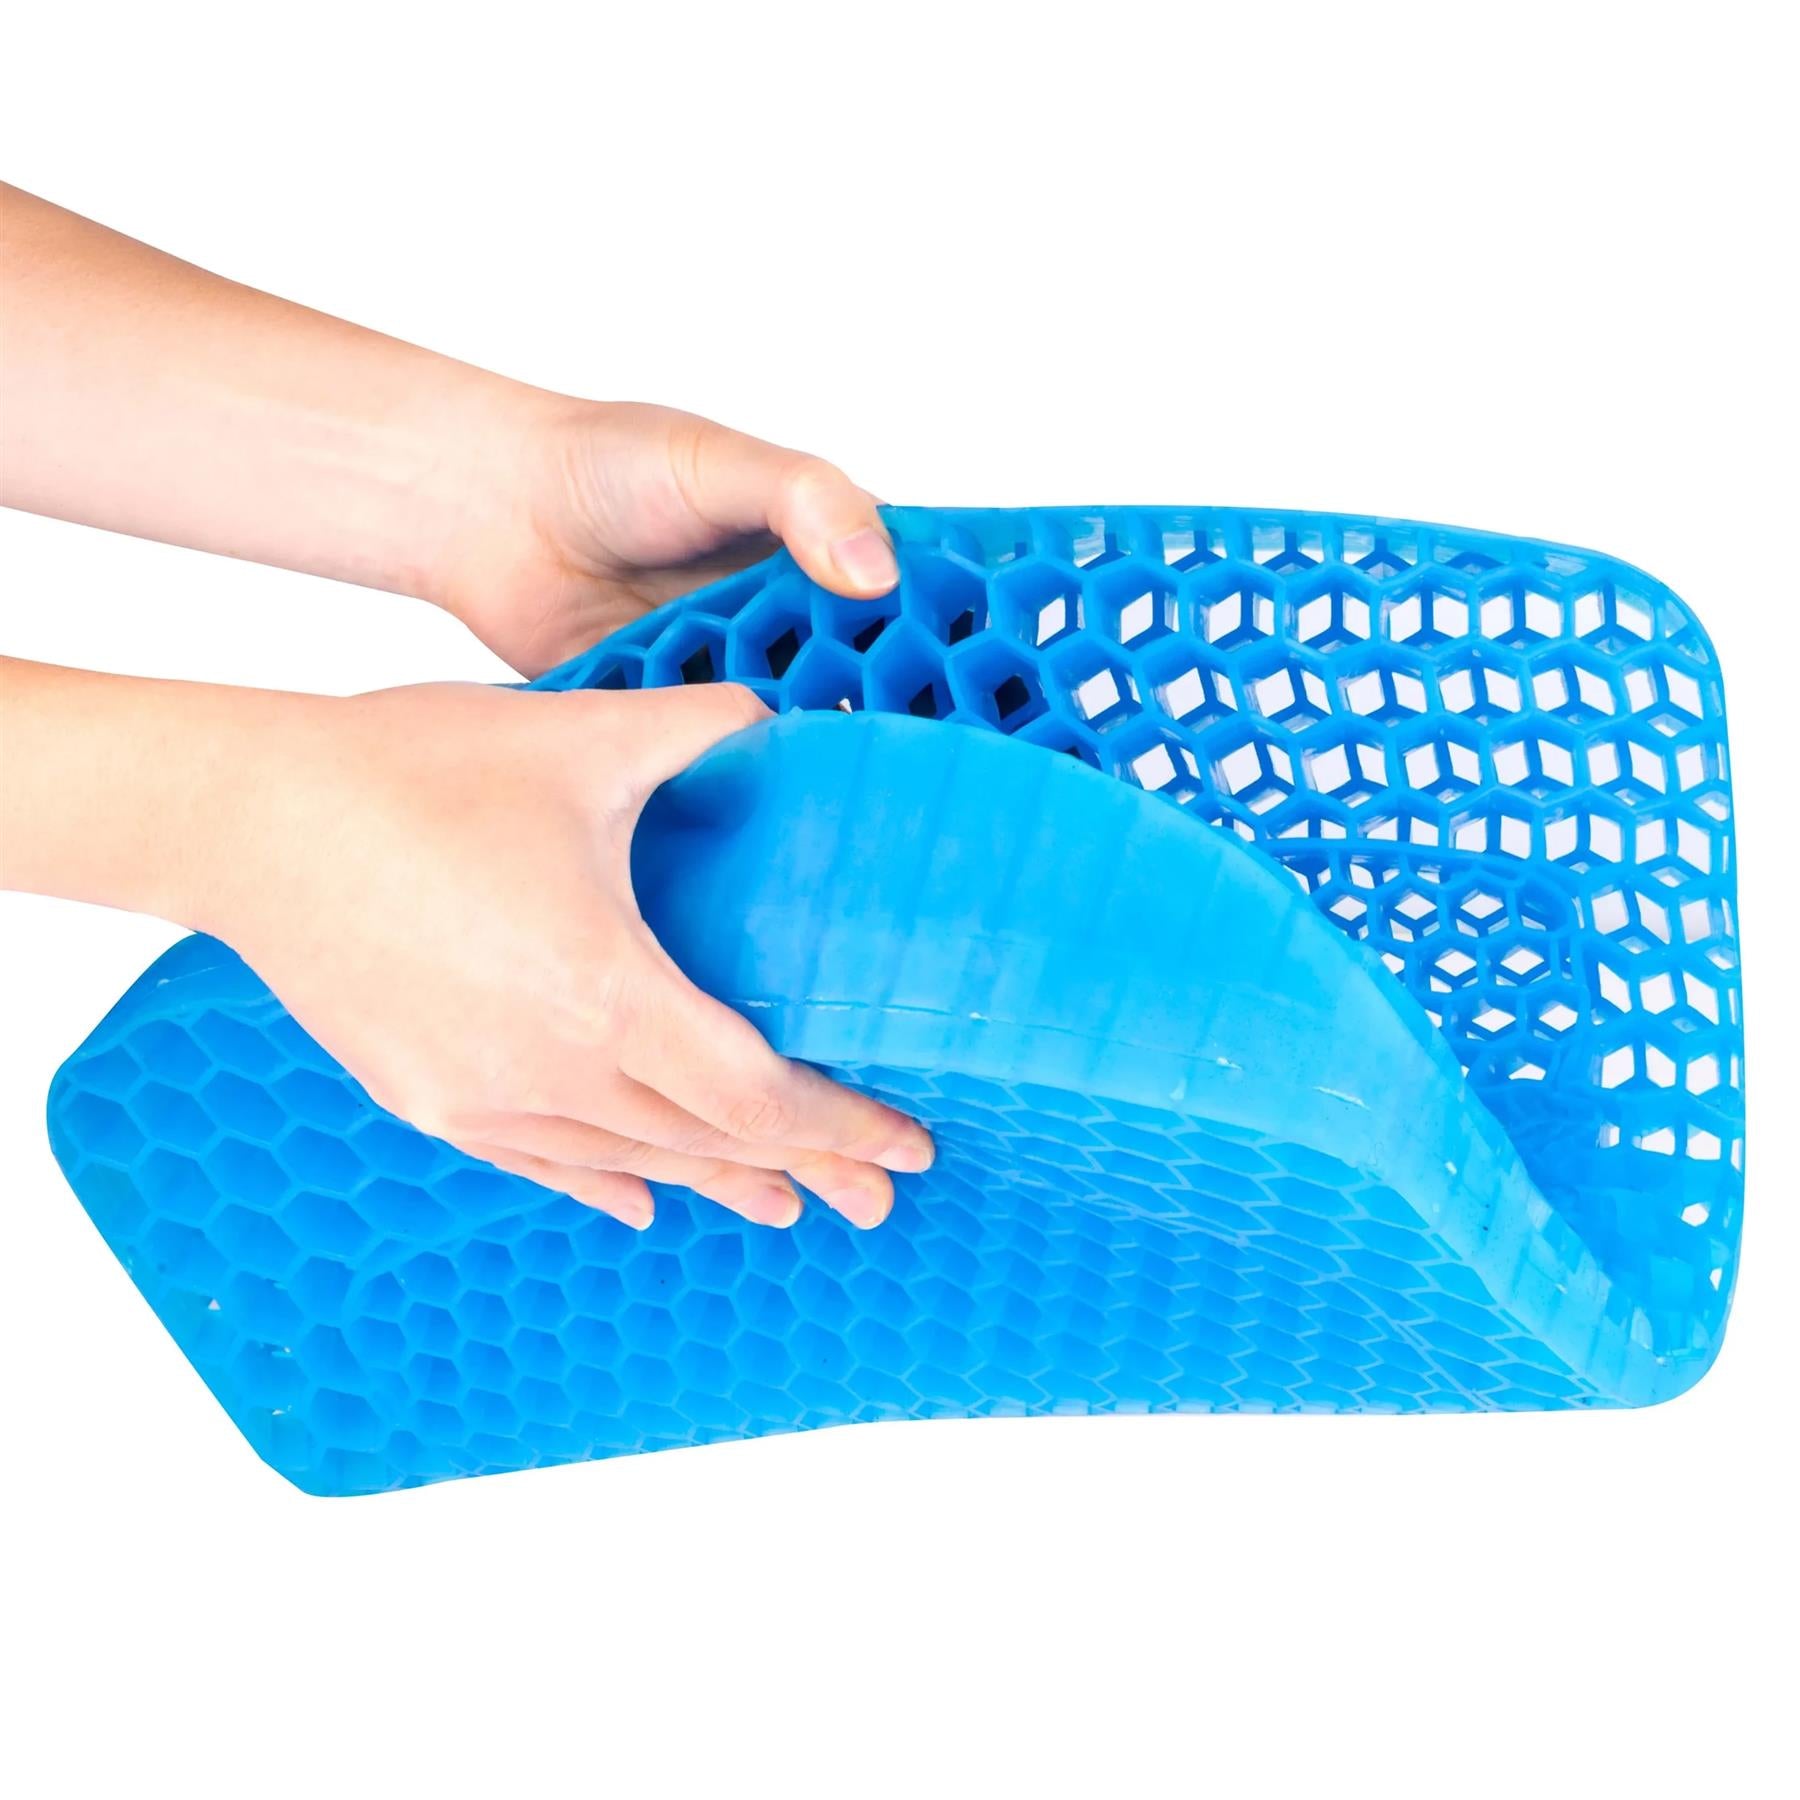 Orthopaedic Gel Seat Cushion by GEEZY - The Magic Toy Shop